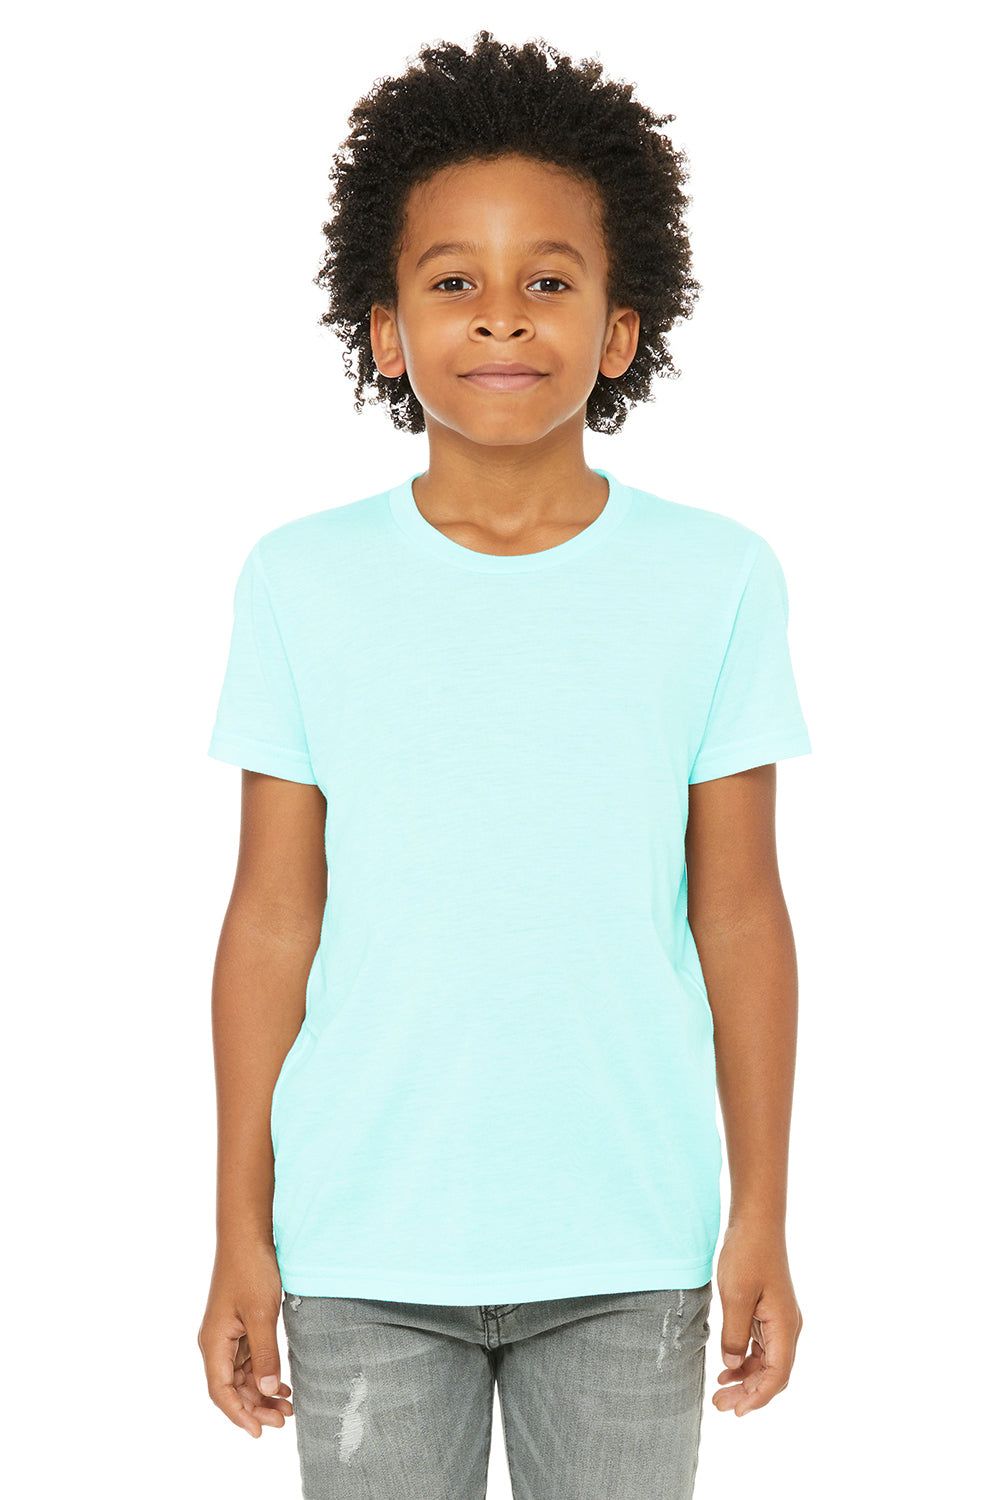 Bella + Canvas 3413Y Youth Short Sleeve Crewneck T-Shirt Ice Blue Model Front